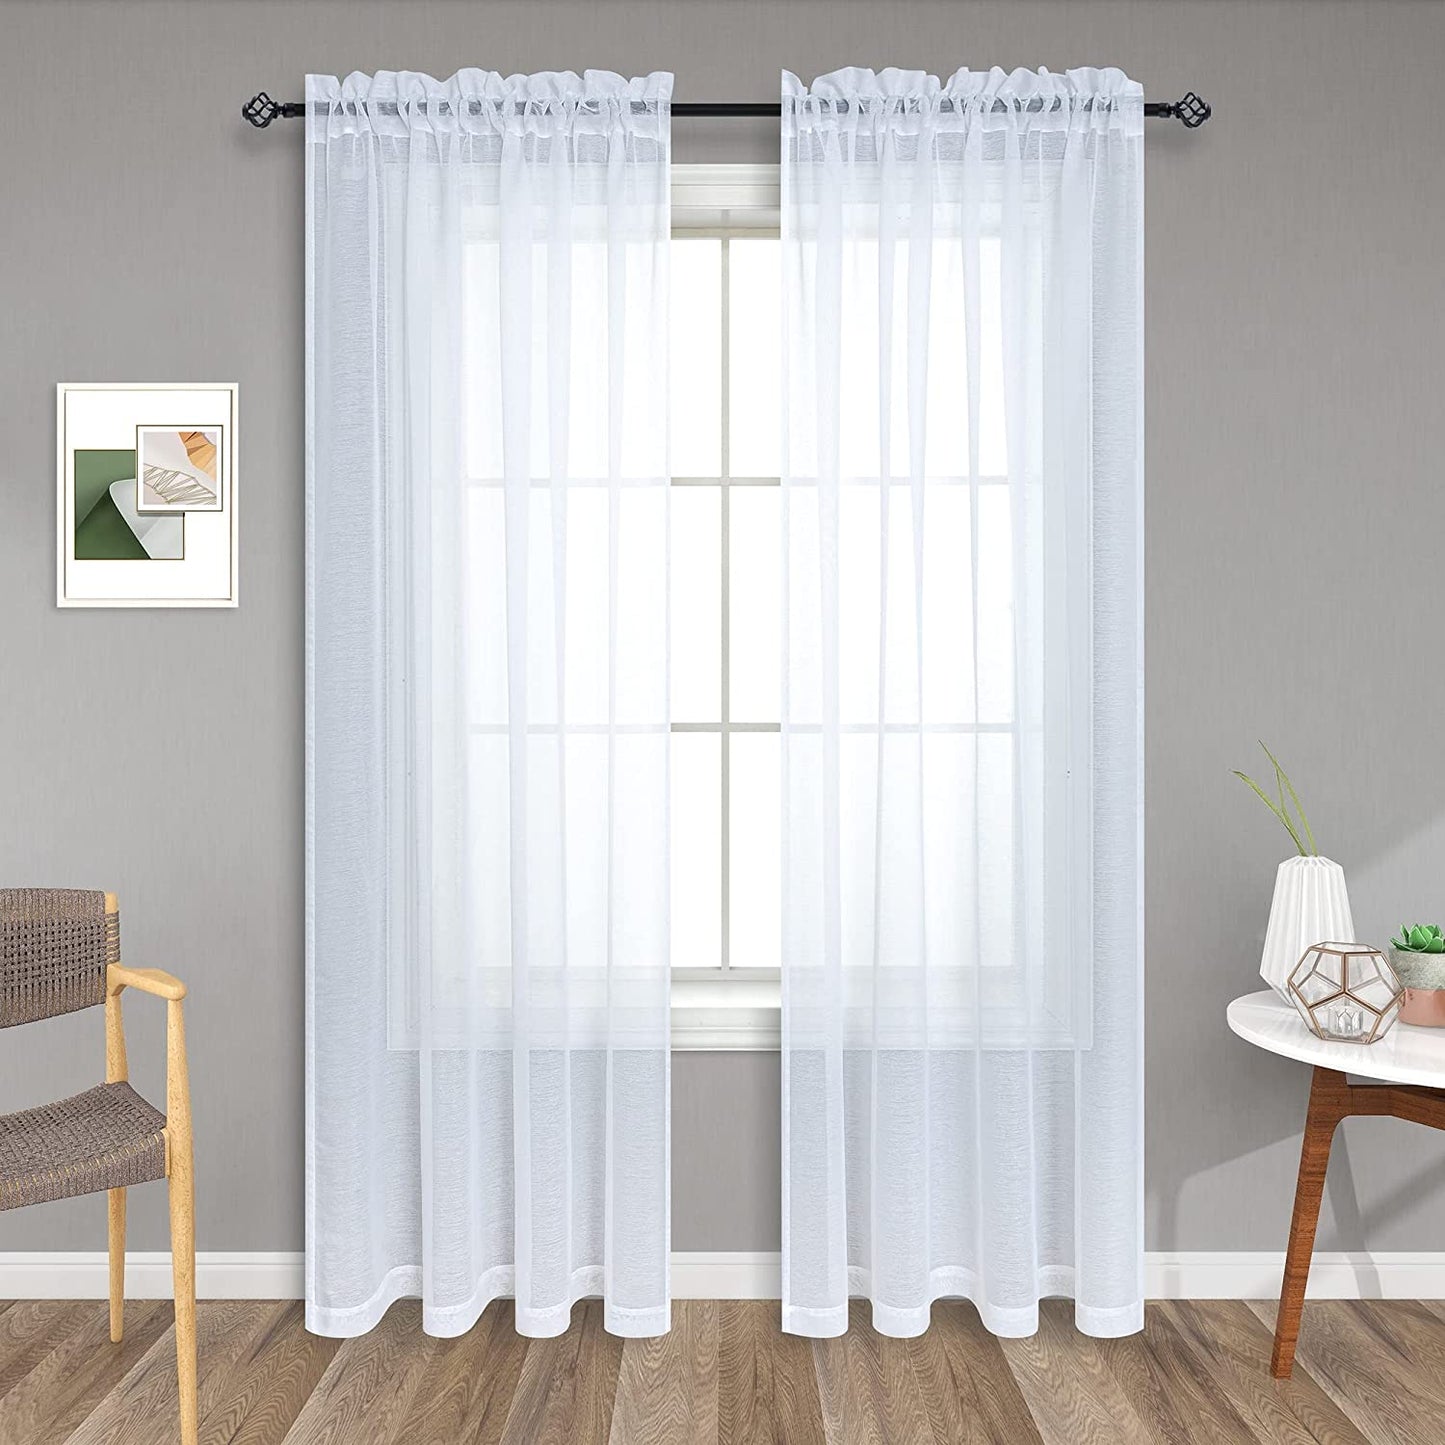 Terracotta Curtains 84 Inch Length for Living Room 2 Panel Sets Rod Pocket Sheer Curtains for Living Room Rust Burnt Orange Red  PITALK TEXTILE White 52X120 